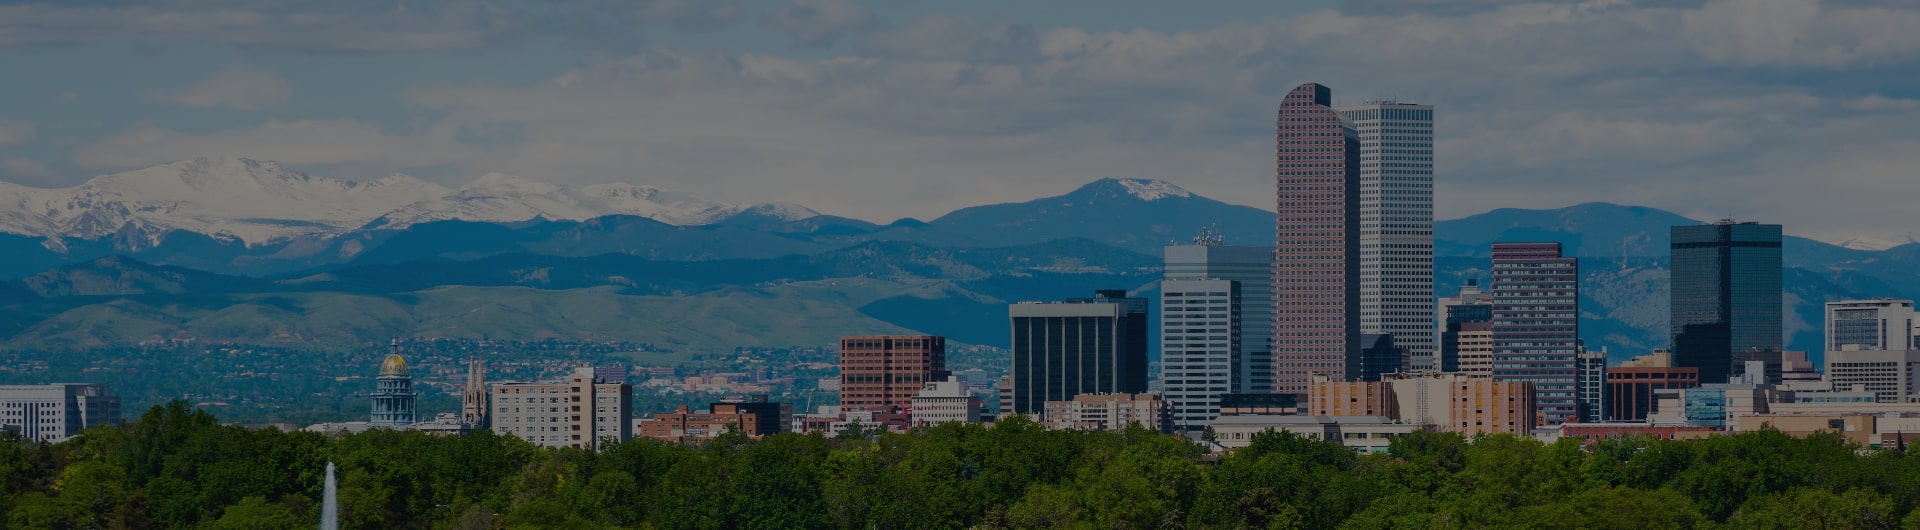 View of downtown Denver and Colorado mountains